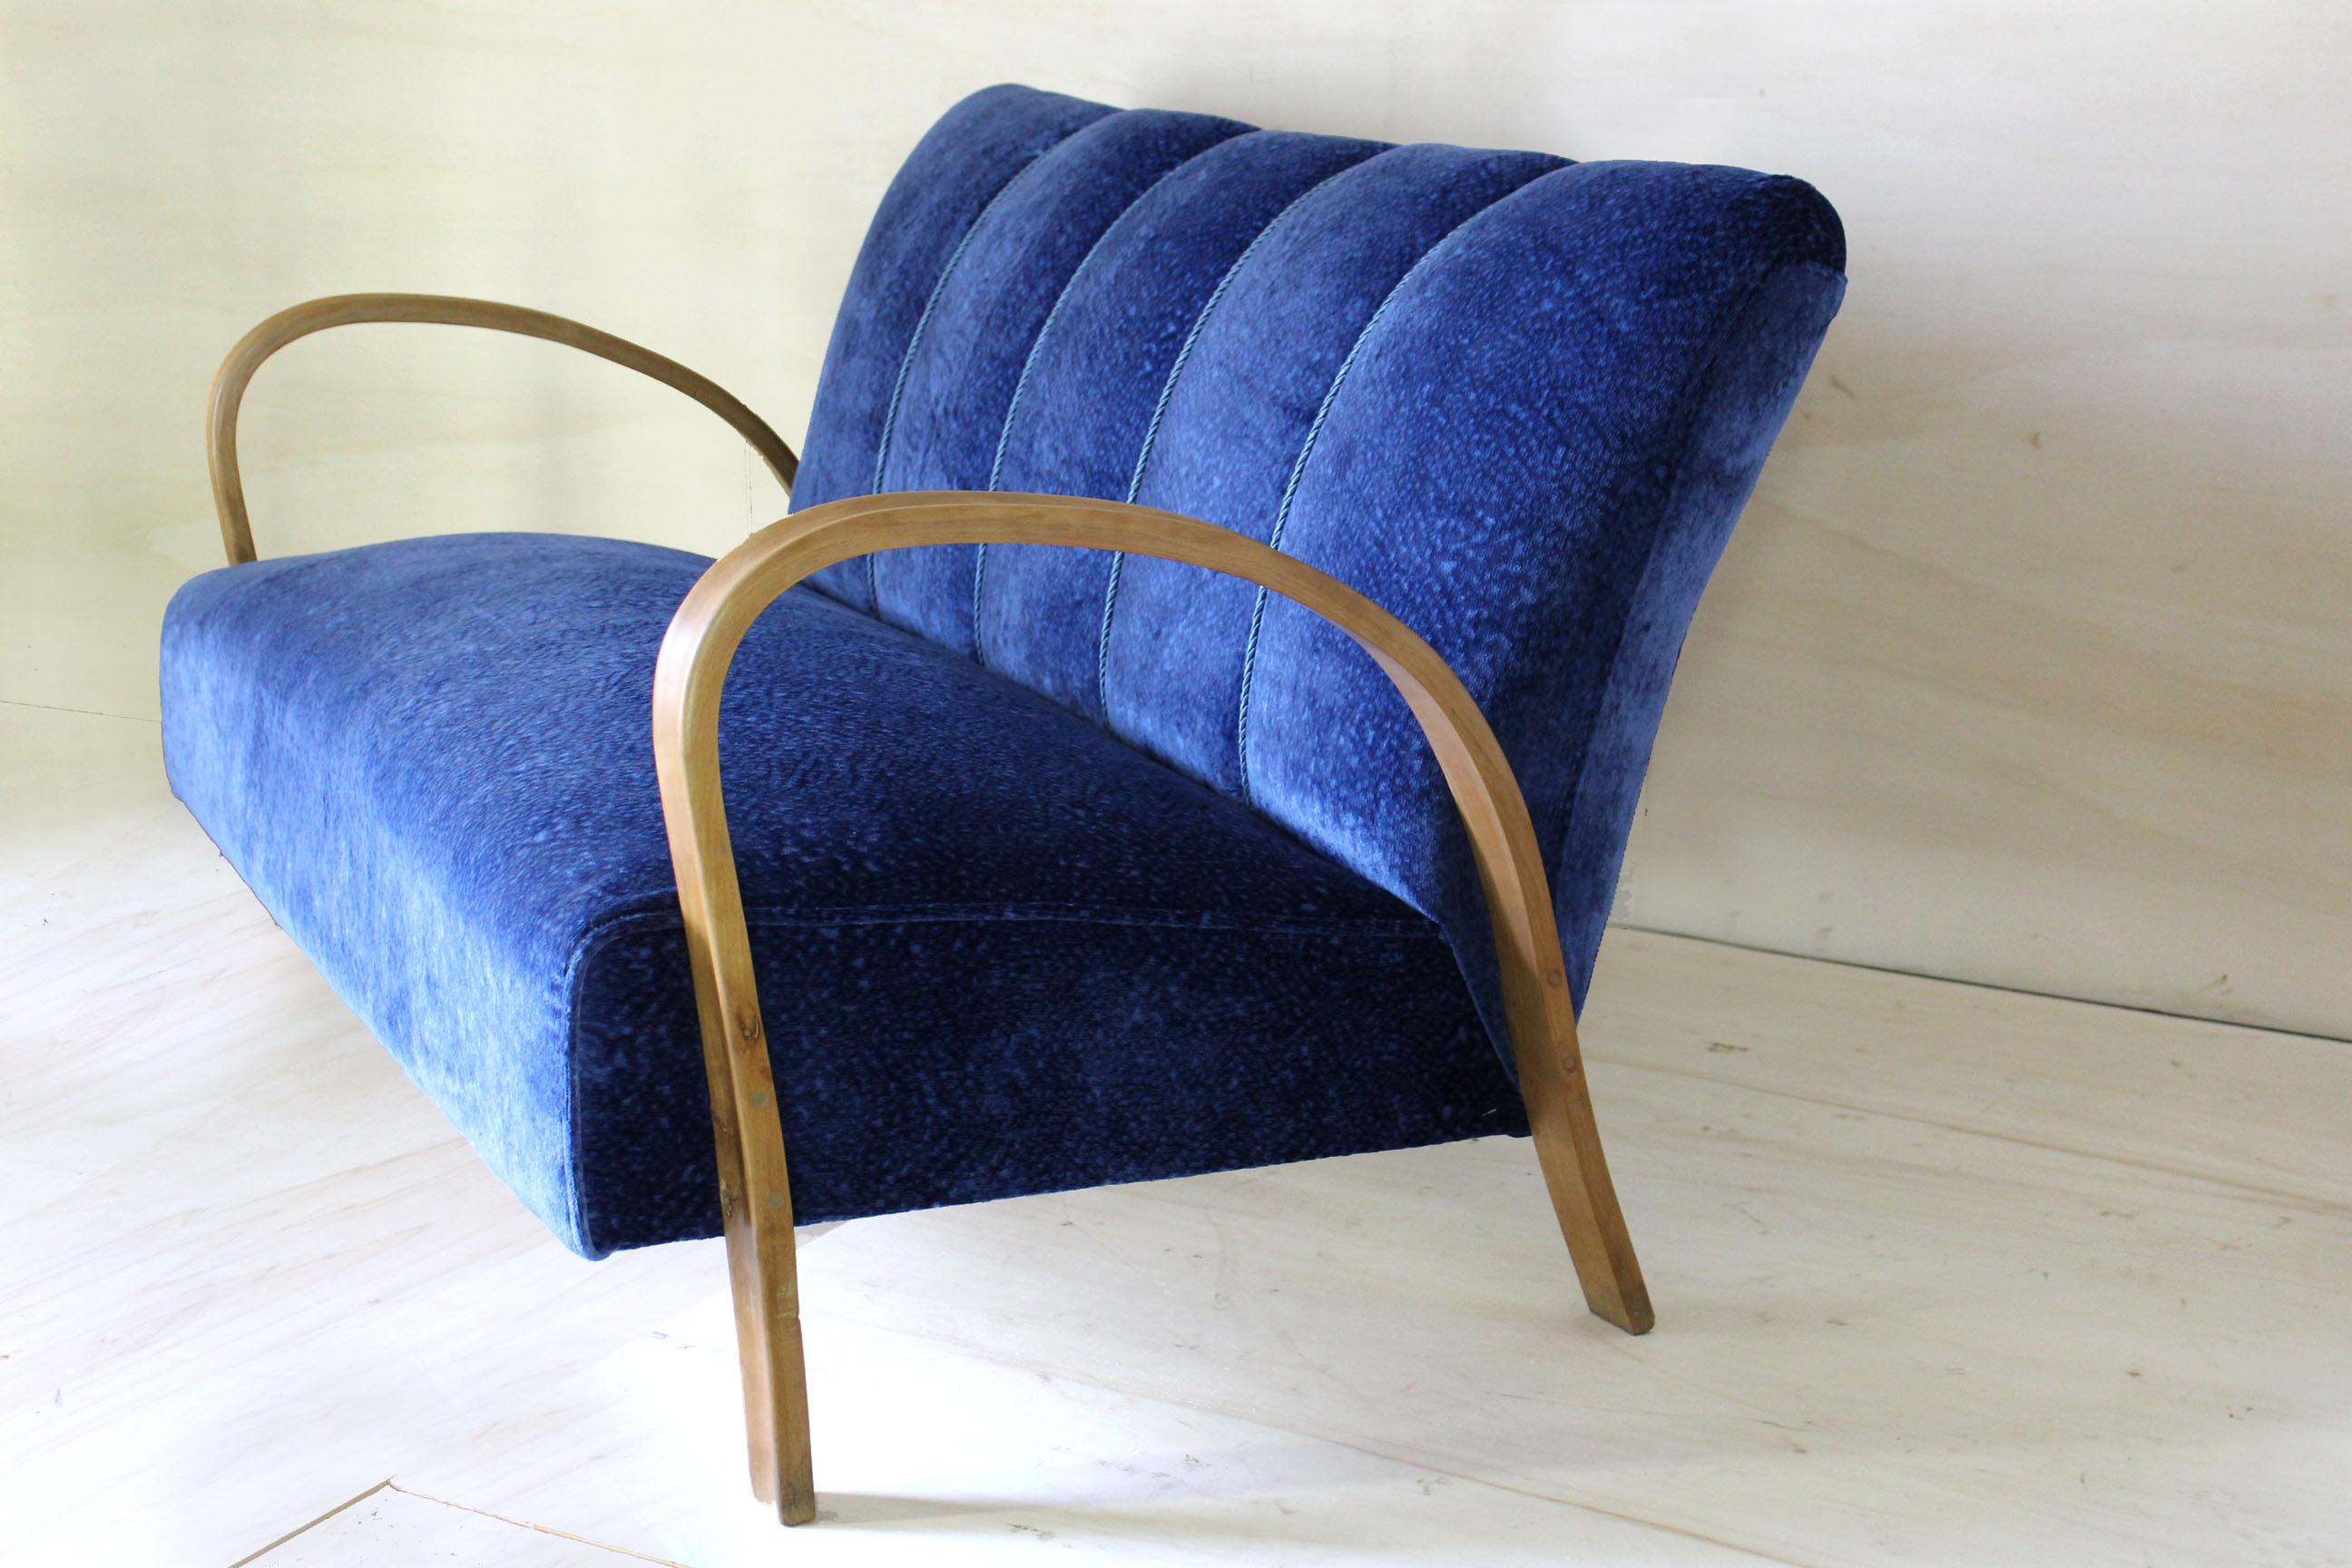 1940s vintage sofa in art deco style with velvet blue cover 1